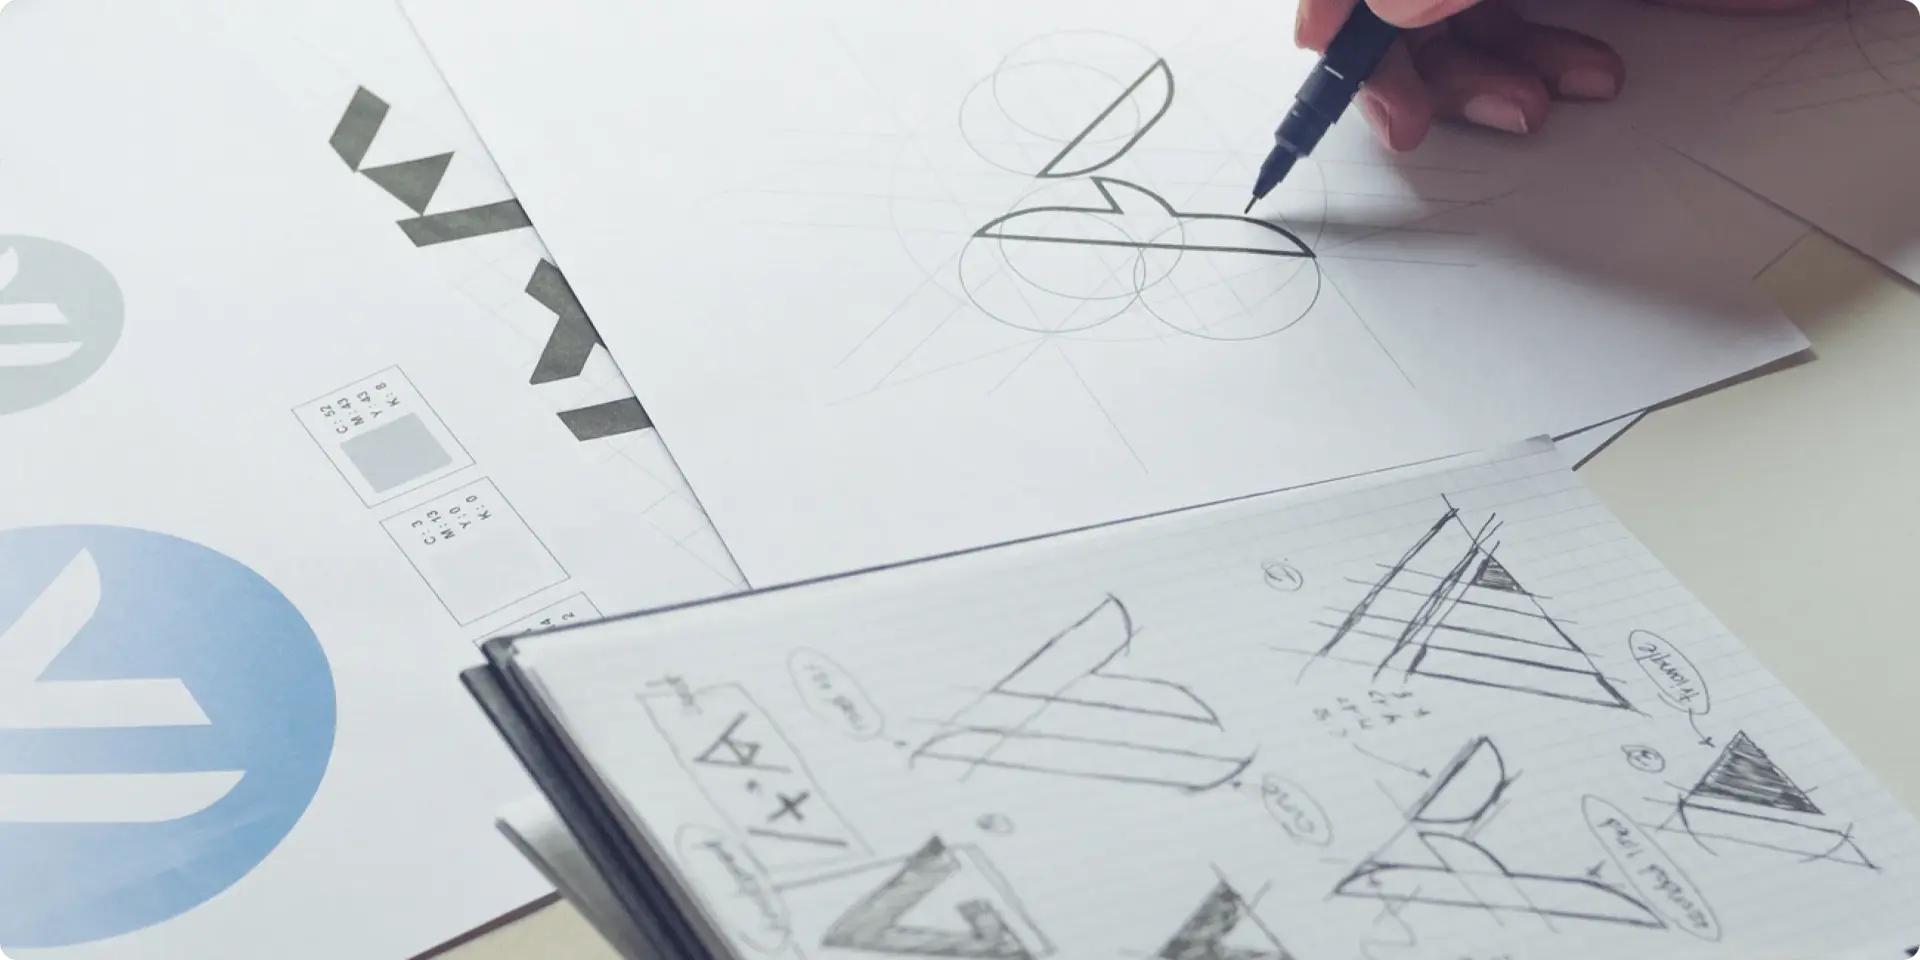 How to design a logo for your brand or business